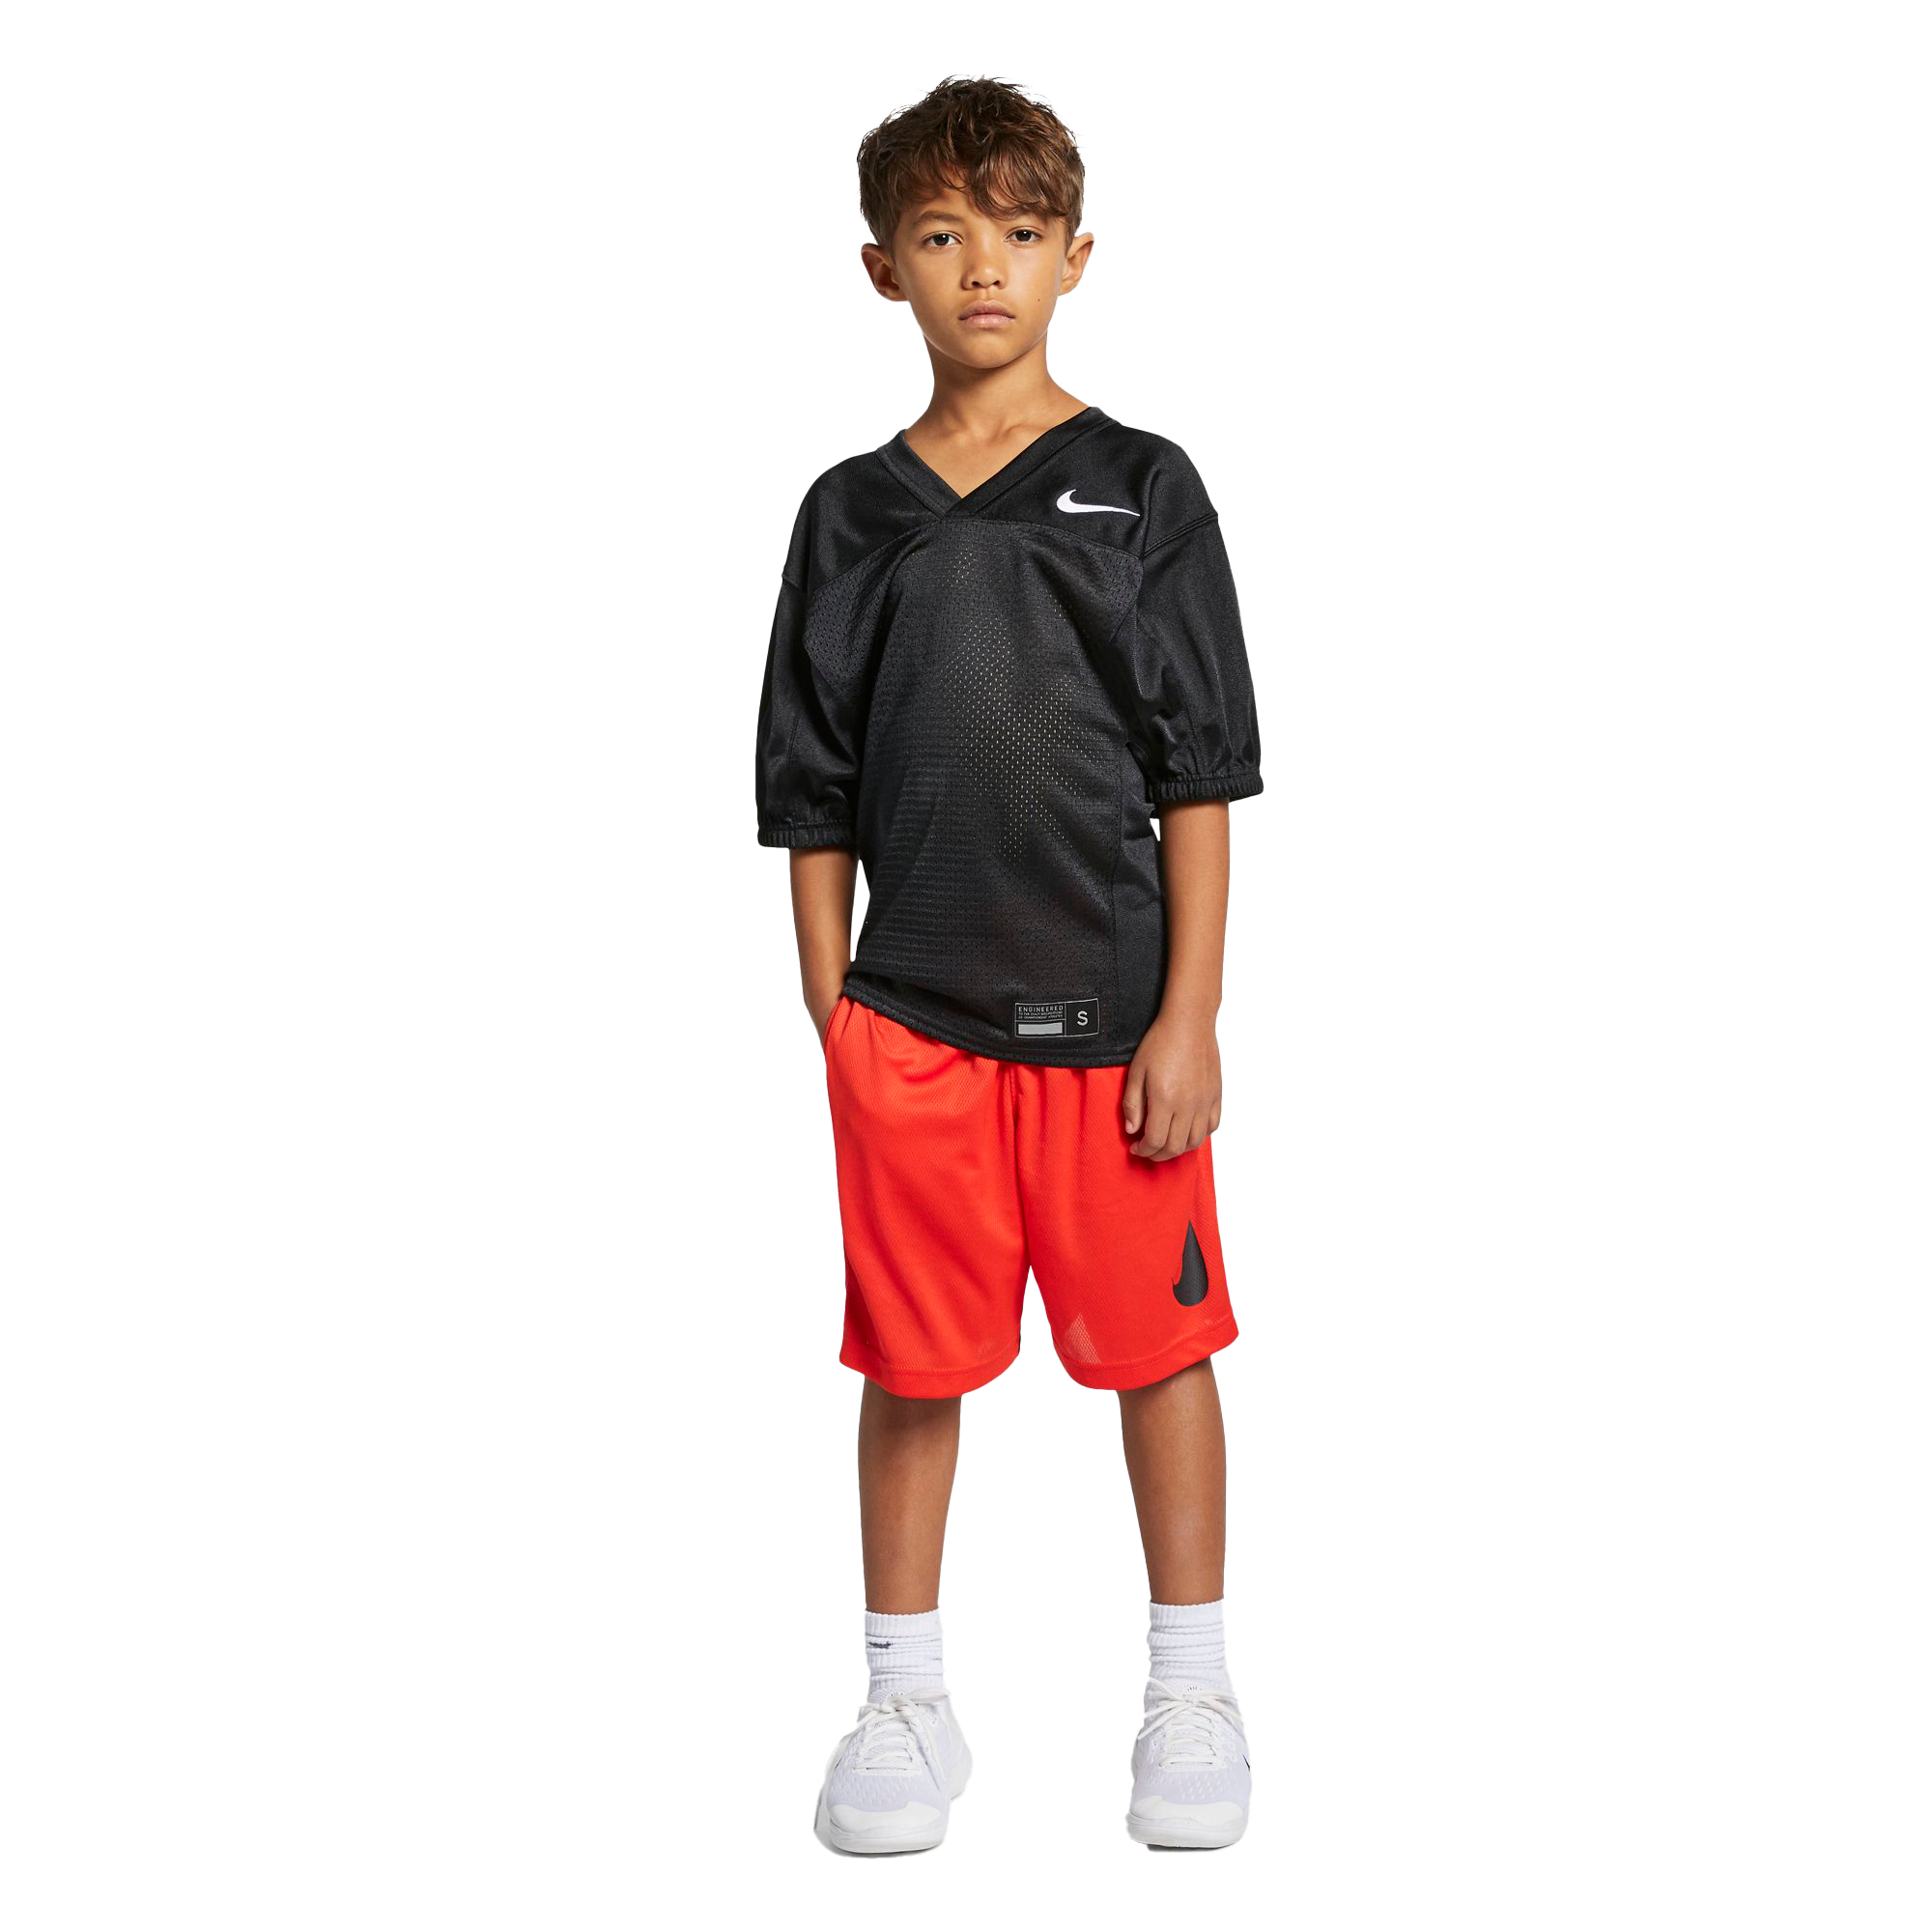 Exxact Sports Boys Football Jersey - Youth Football Practice Jersey,  Football Practice Apparel, Football Jerseys for Kids